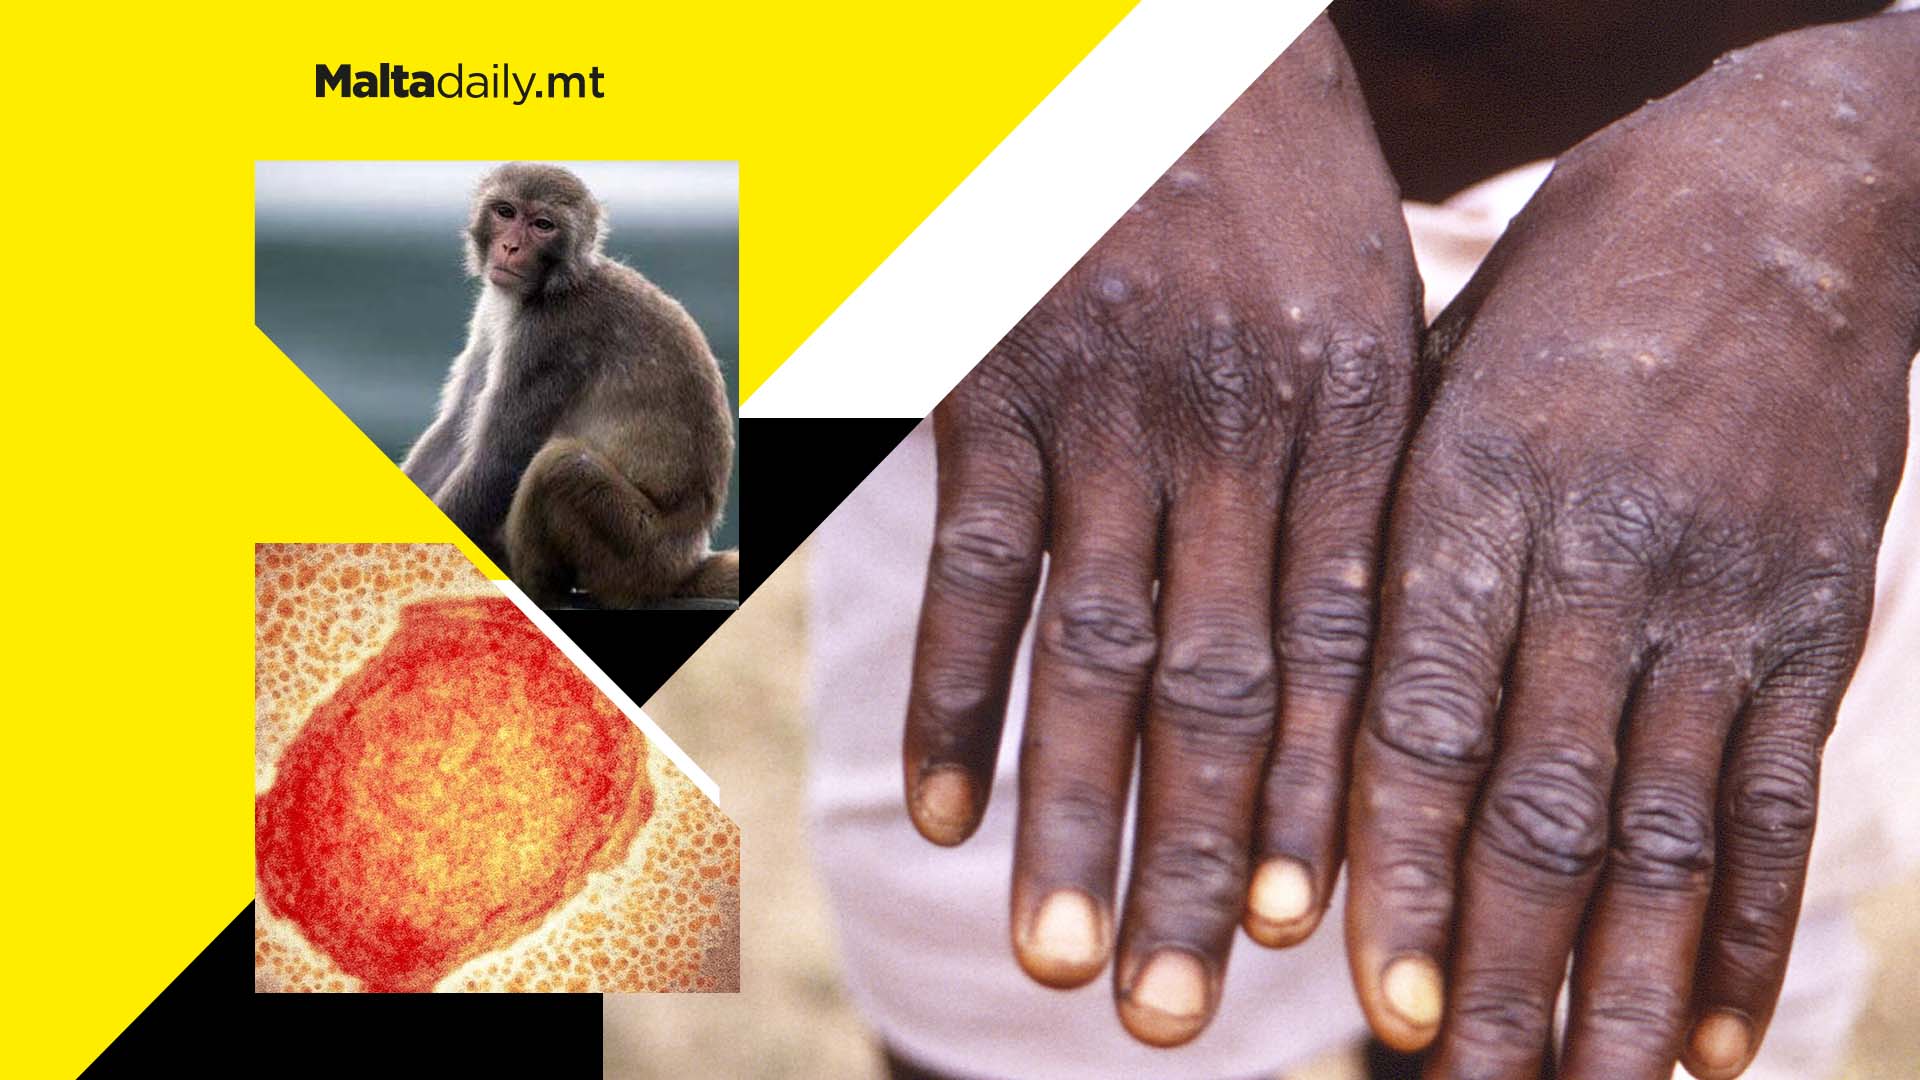 Monkeypox: What do we know about it?